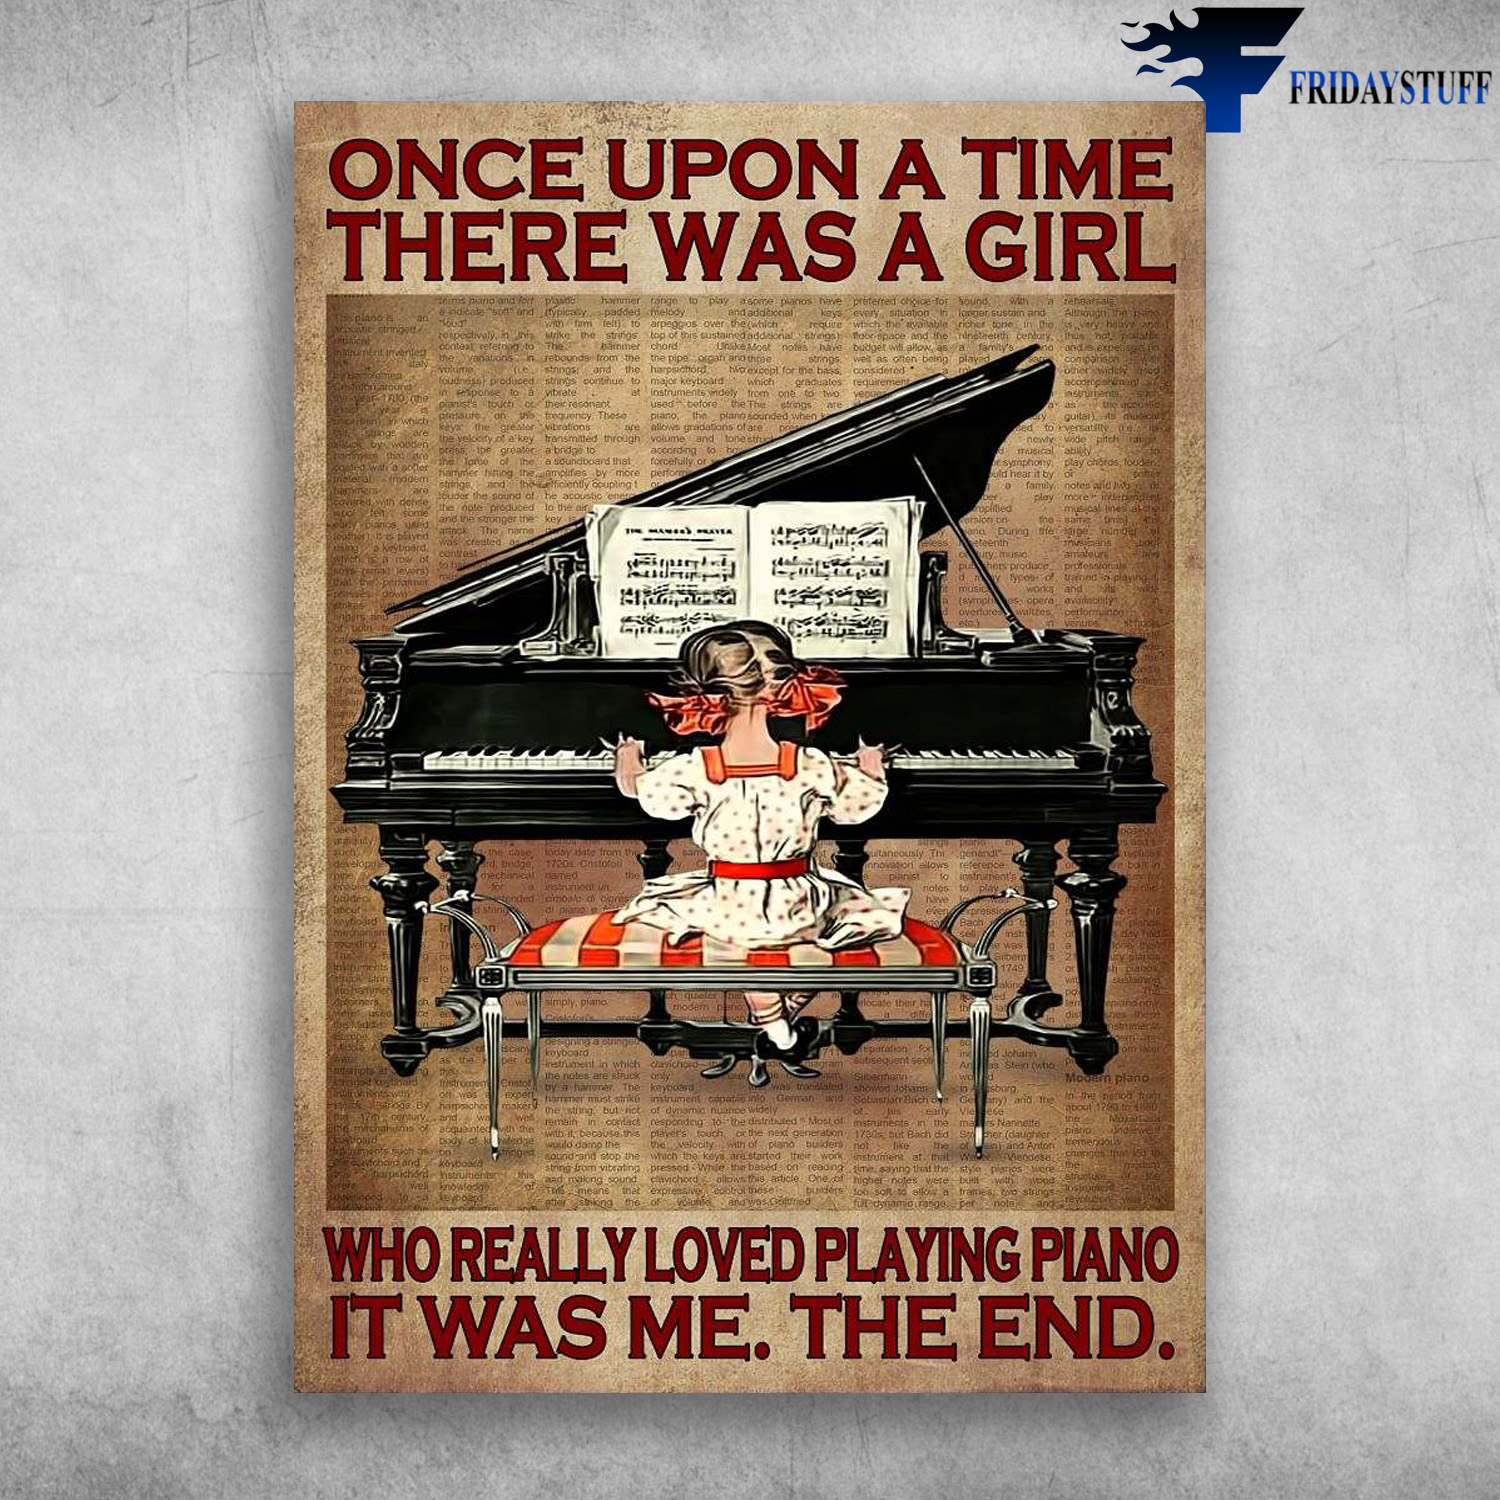 Little Girl Piano - Once Upon A Time, There Was A Girl, Who Really Loved Playing Piano, Is Was Me, The End